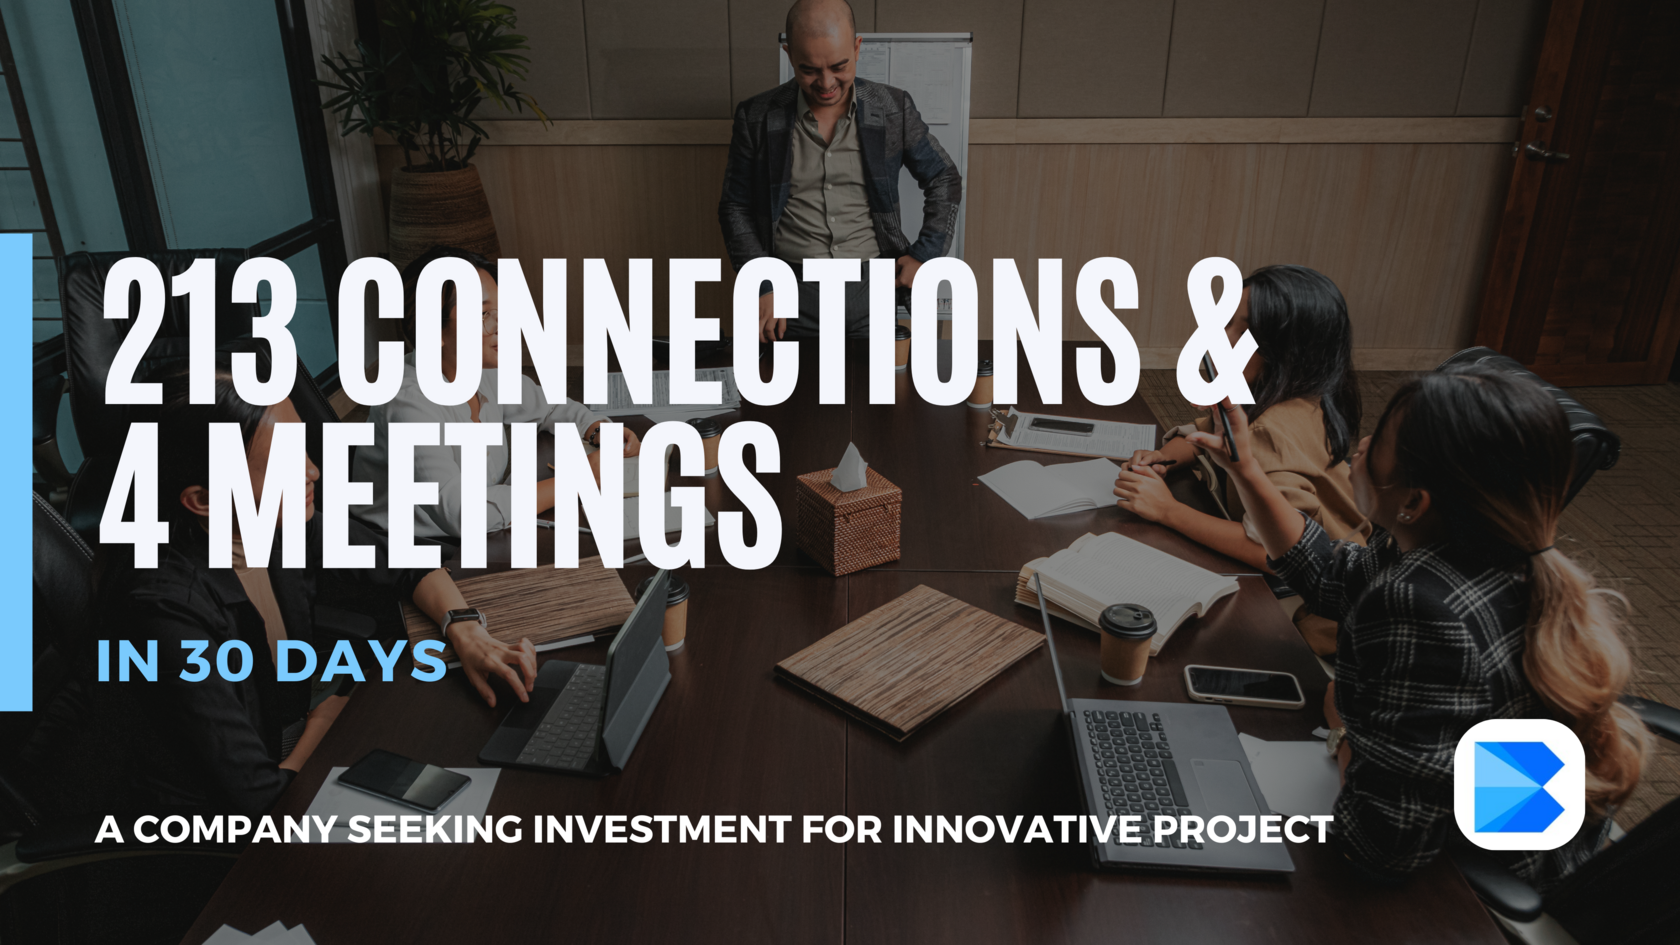 Generating 213 connections and 4 meetings in 30 days - Bitto's investment pursuit